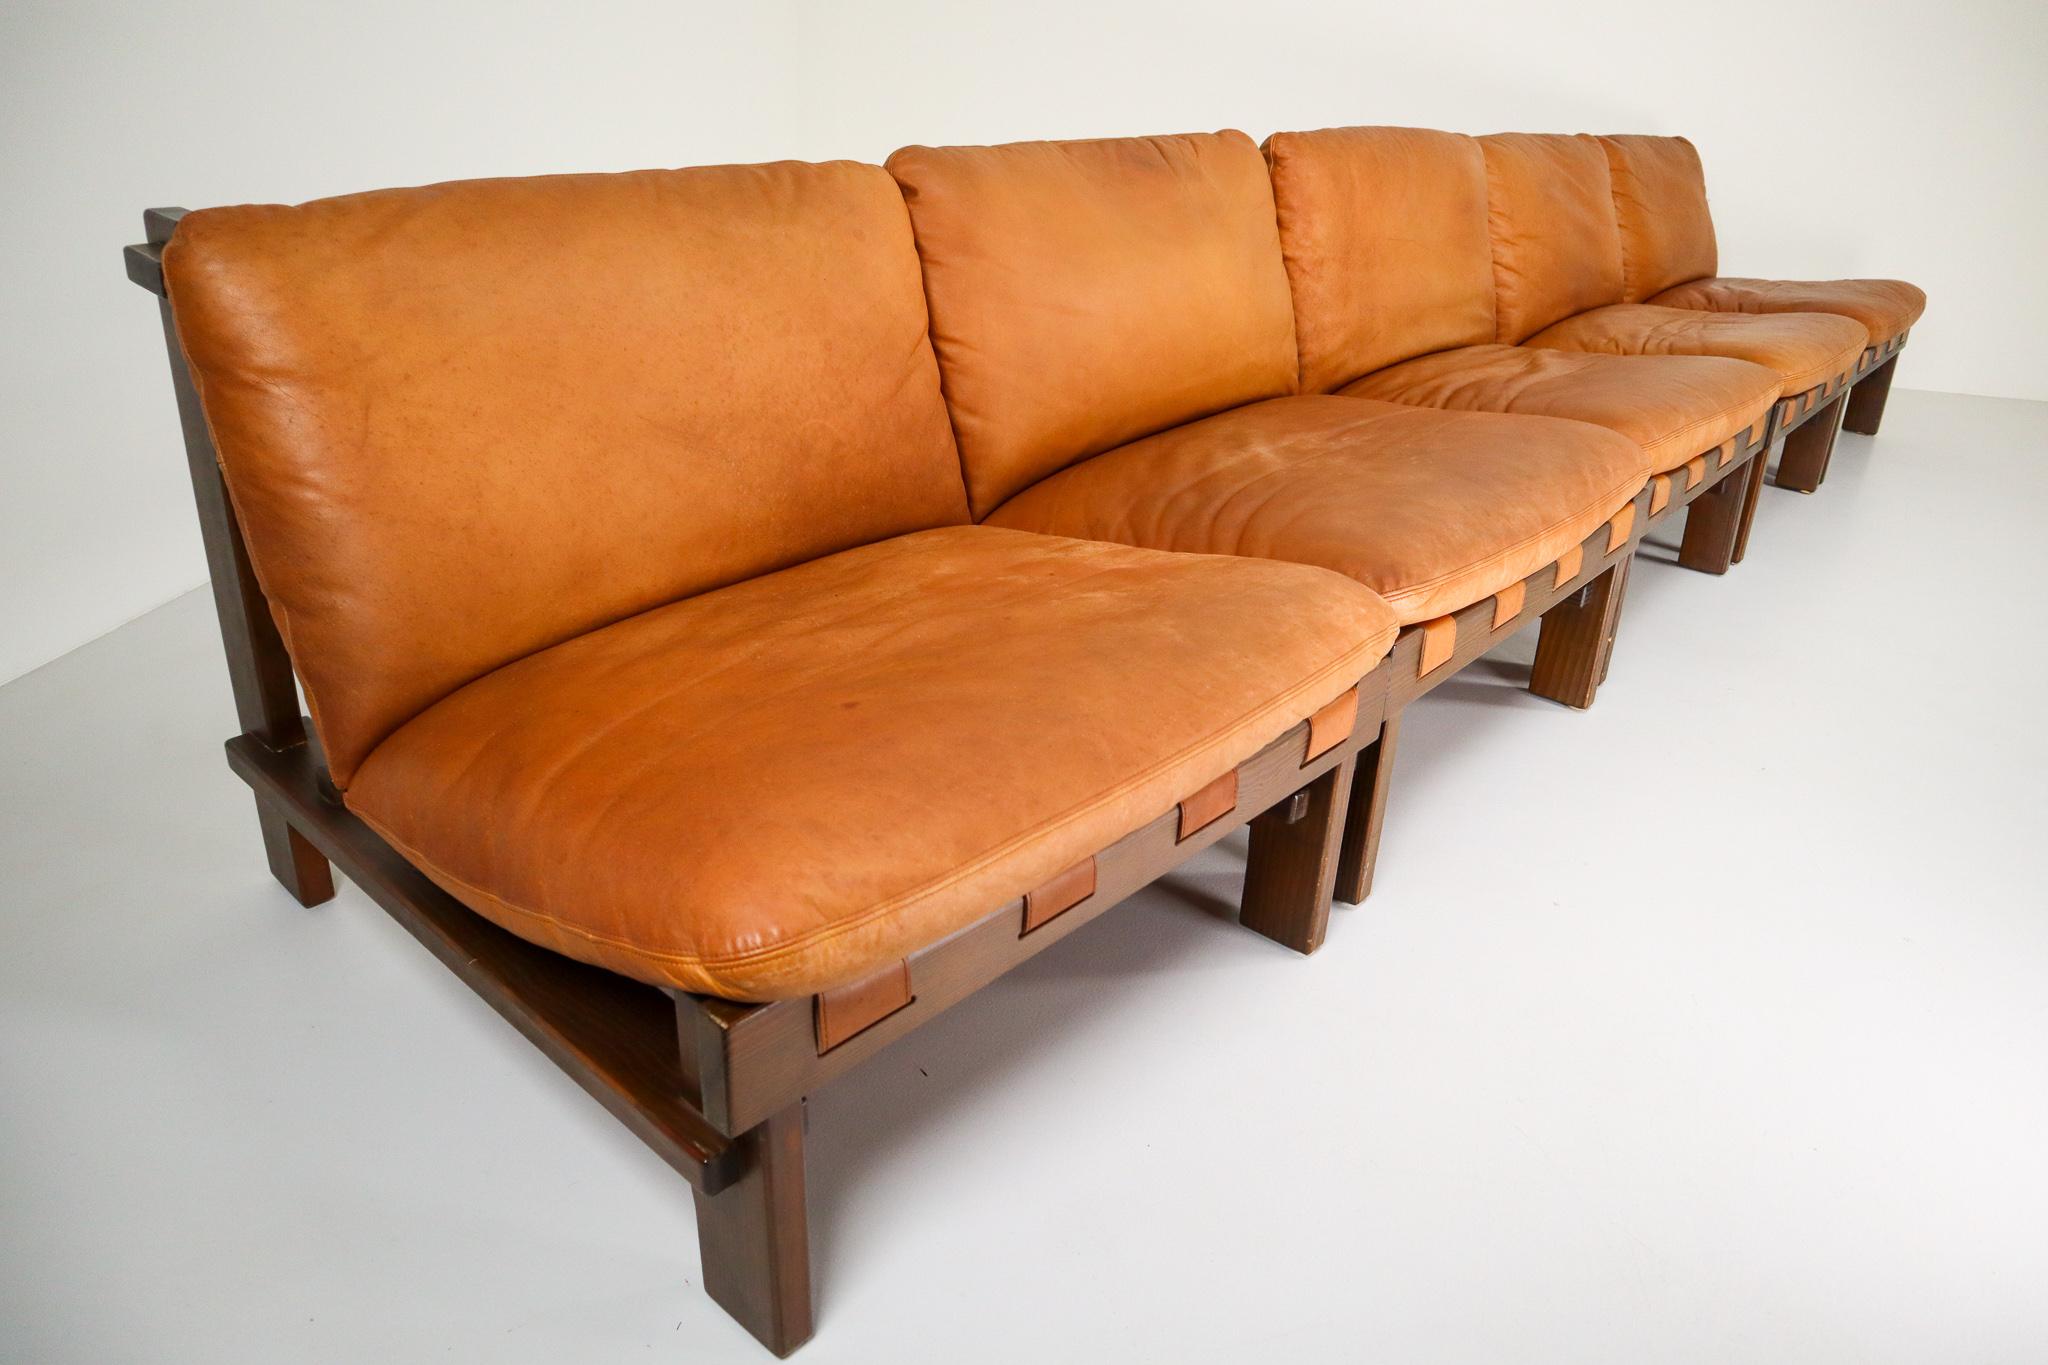 Pair of five lounge chairs by Carl Straub in absolutely gorgeous cognac leather and solid pinewood, circa 1960s. The the soft leather is beautifully patinated during use and age and. Altogether a lovely set that not only attracts attention by its